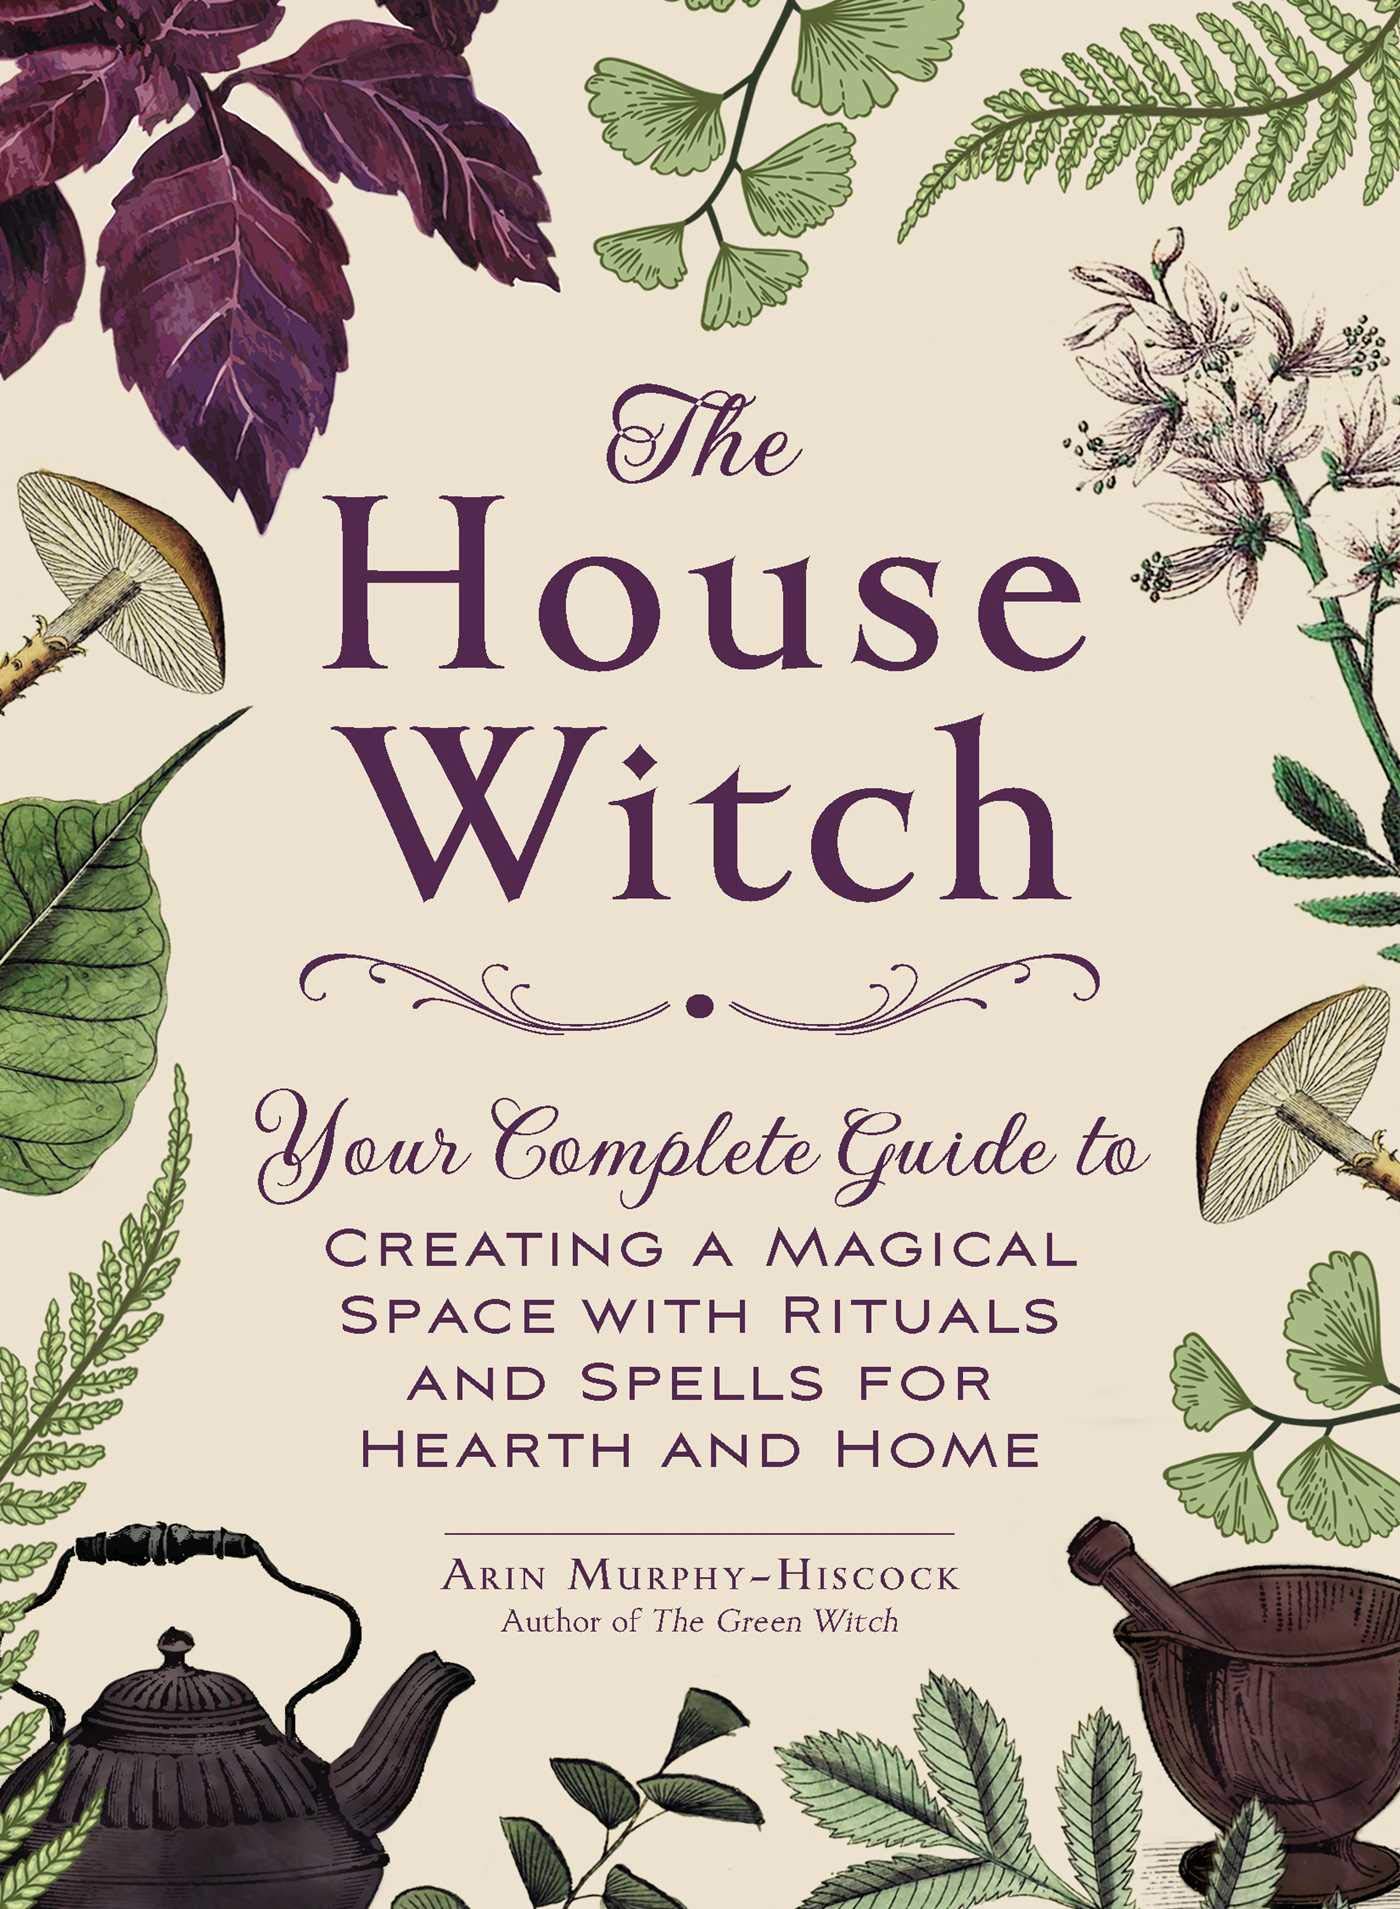 The House Witch : Your Complete Guide to Creating a Magical Space with Rituals and Spells for Hearth and Home [Hardcover]